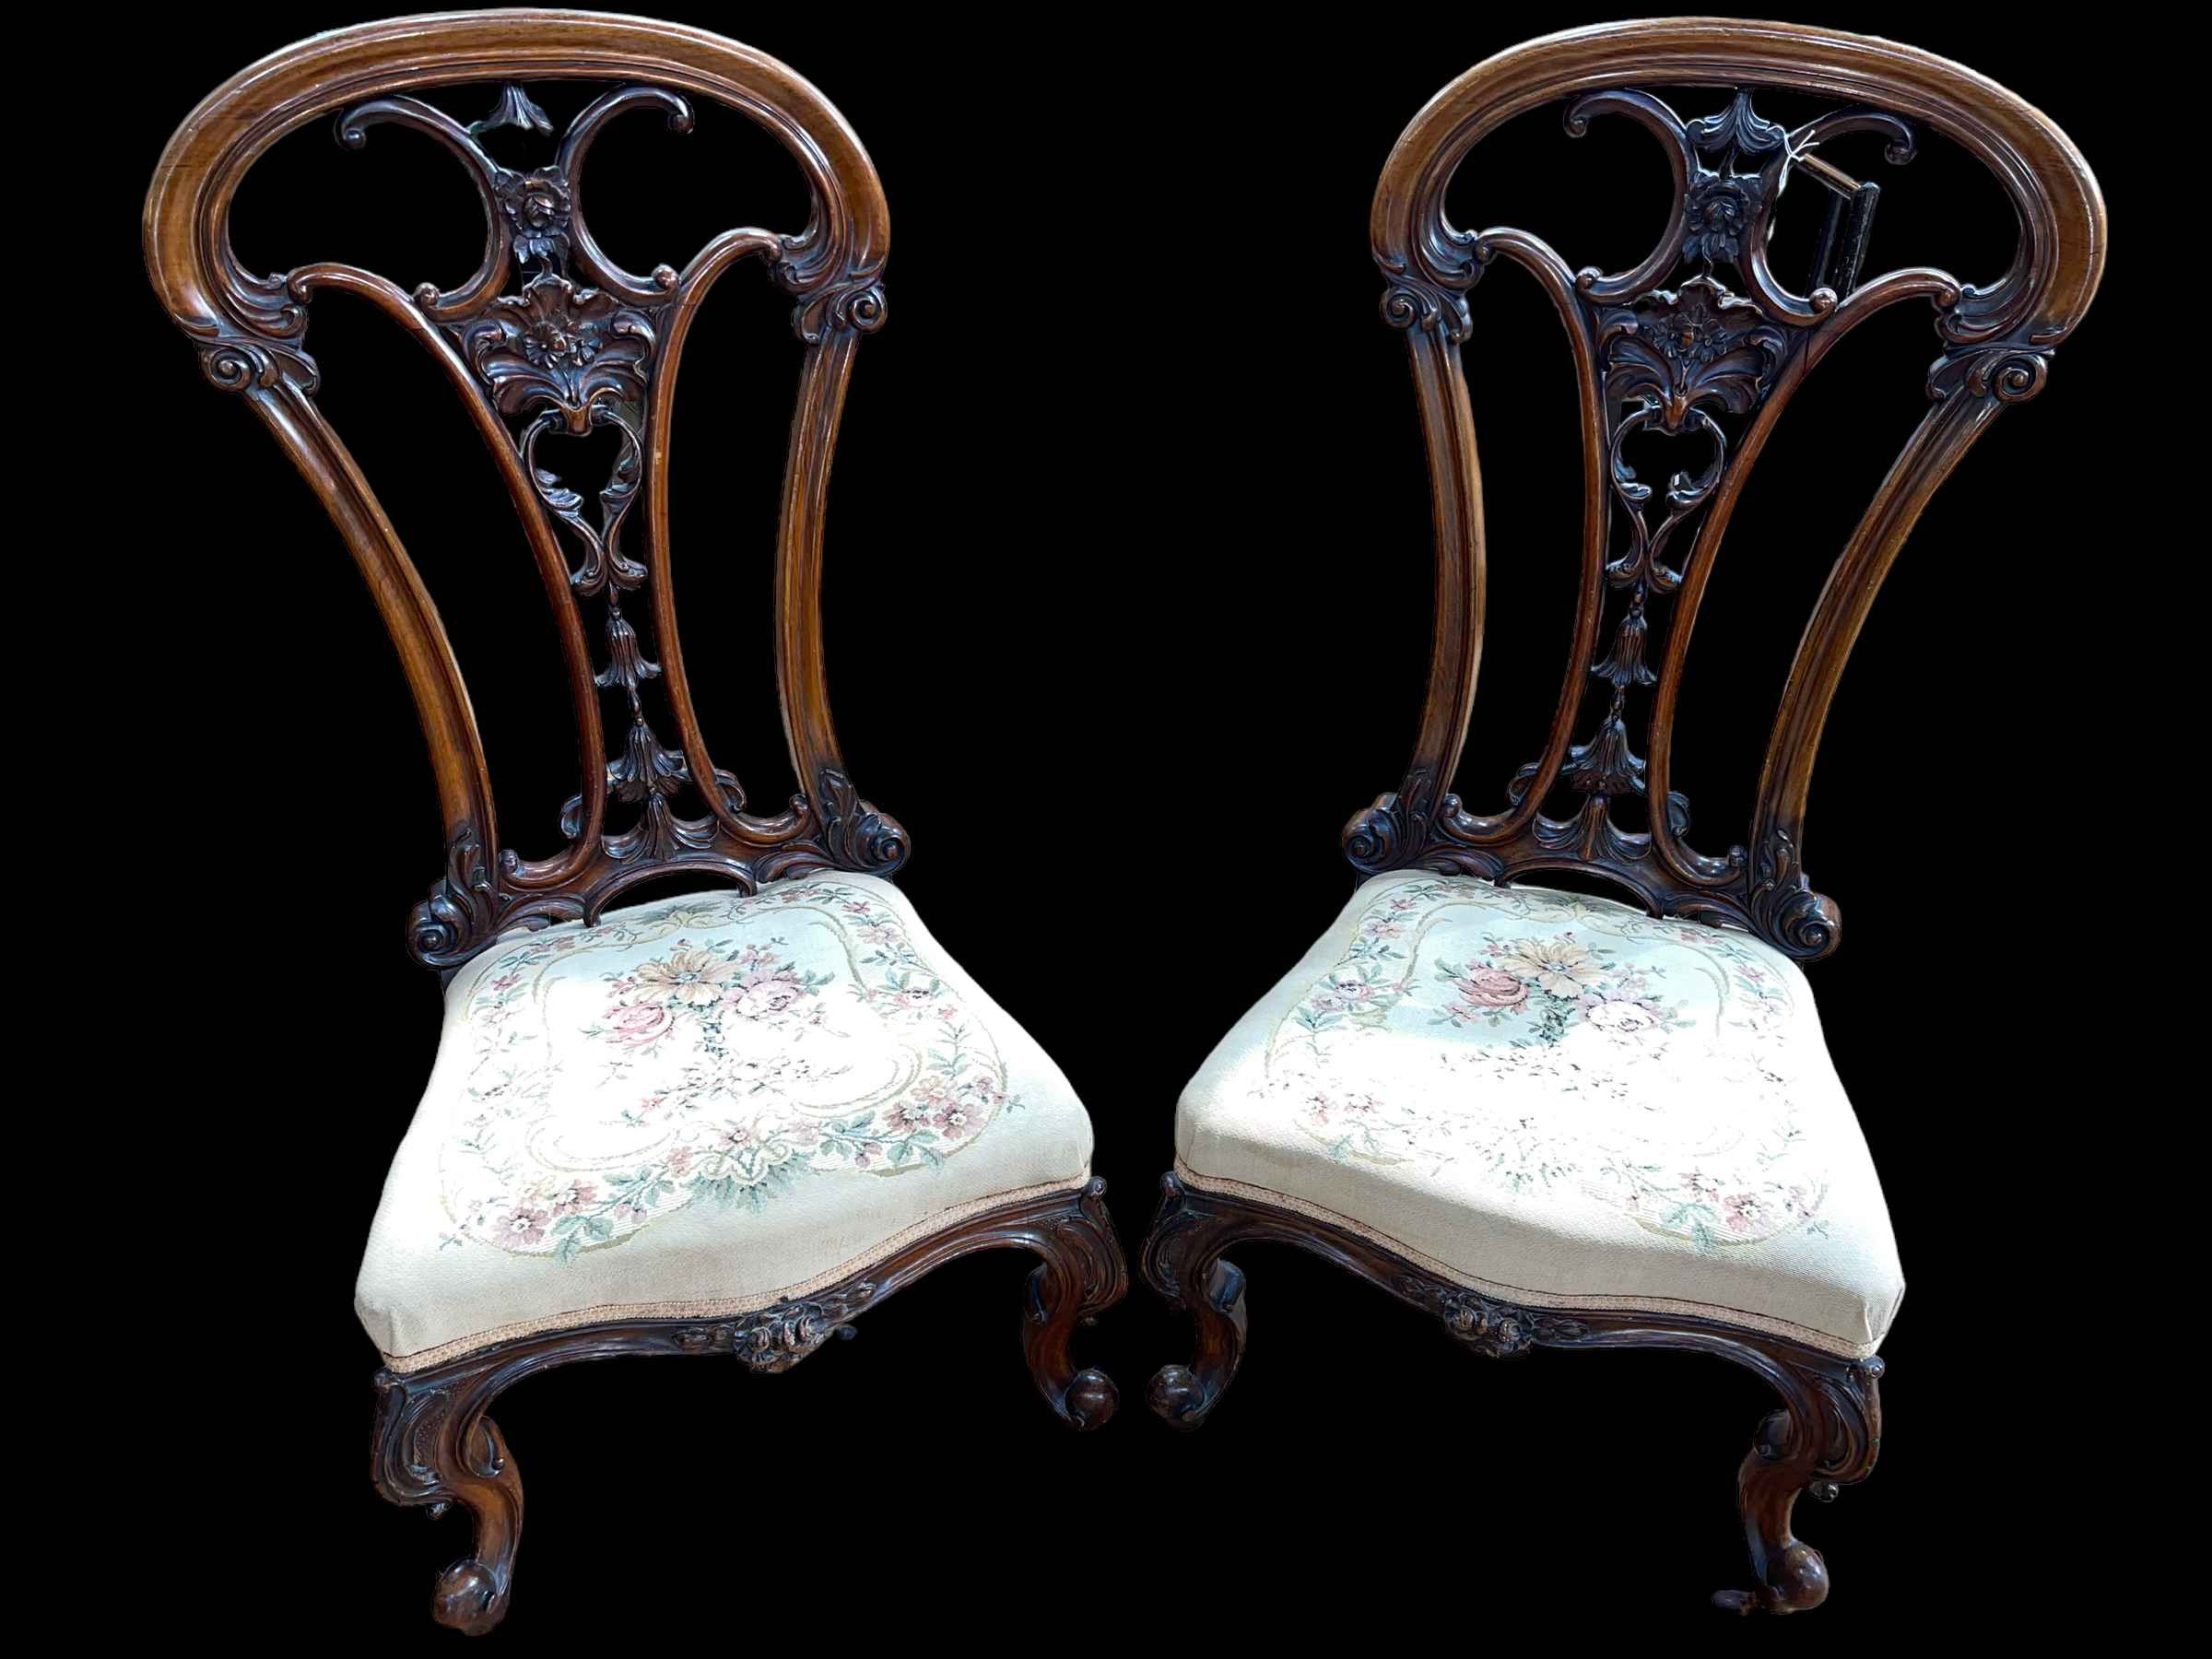 Pair Victorian mahogany open spoon back nursing chairs with floral tapestry seats.